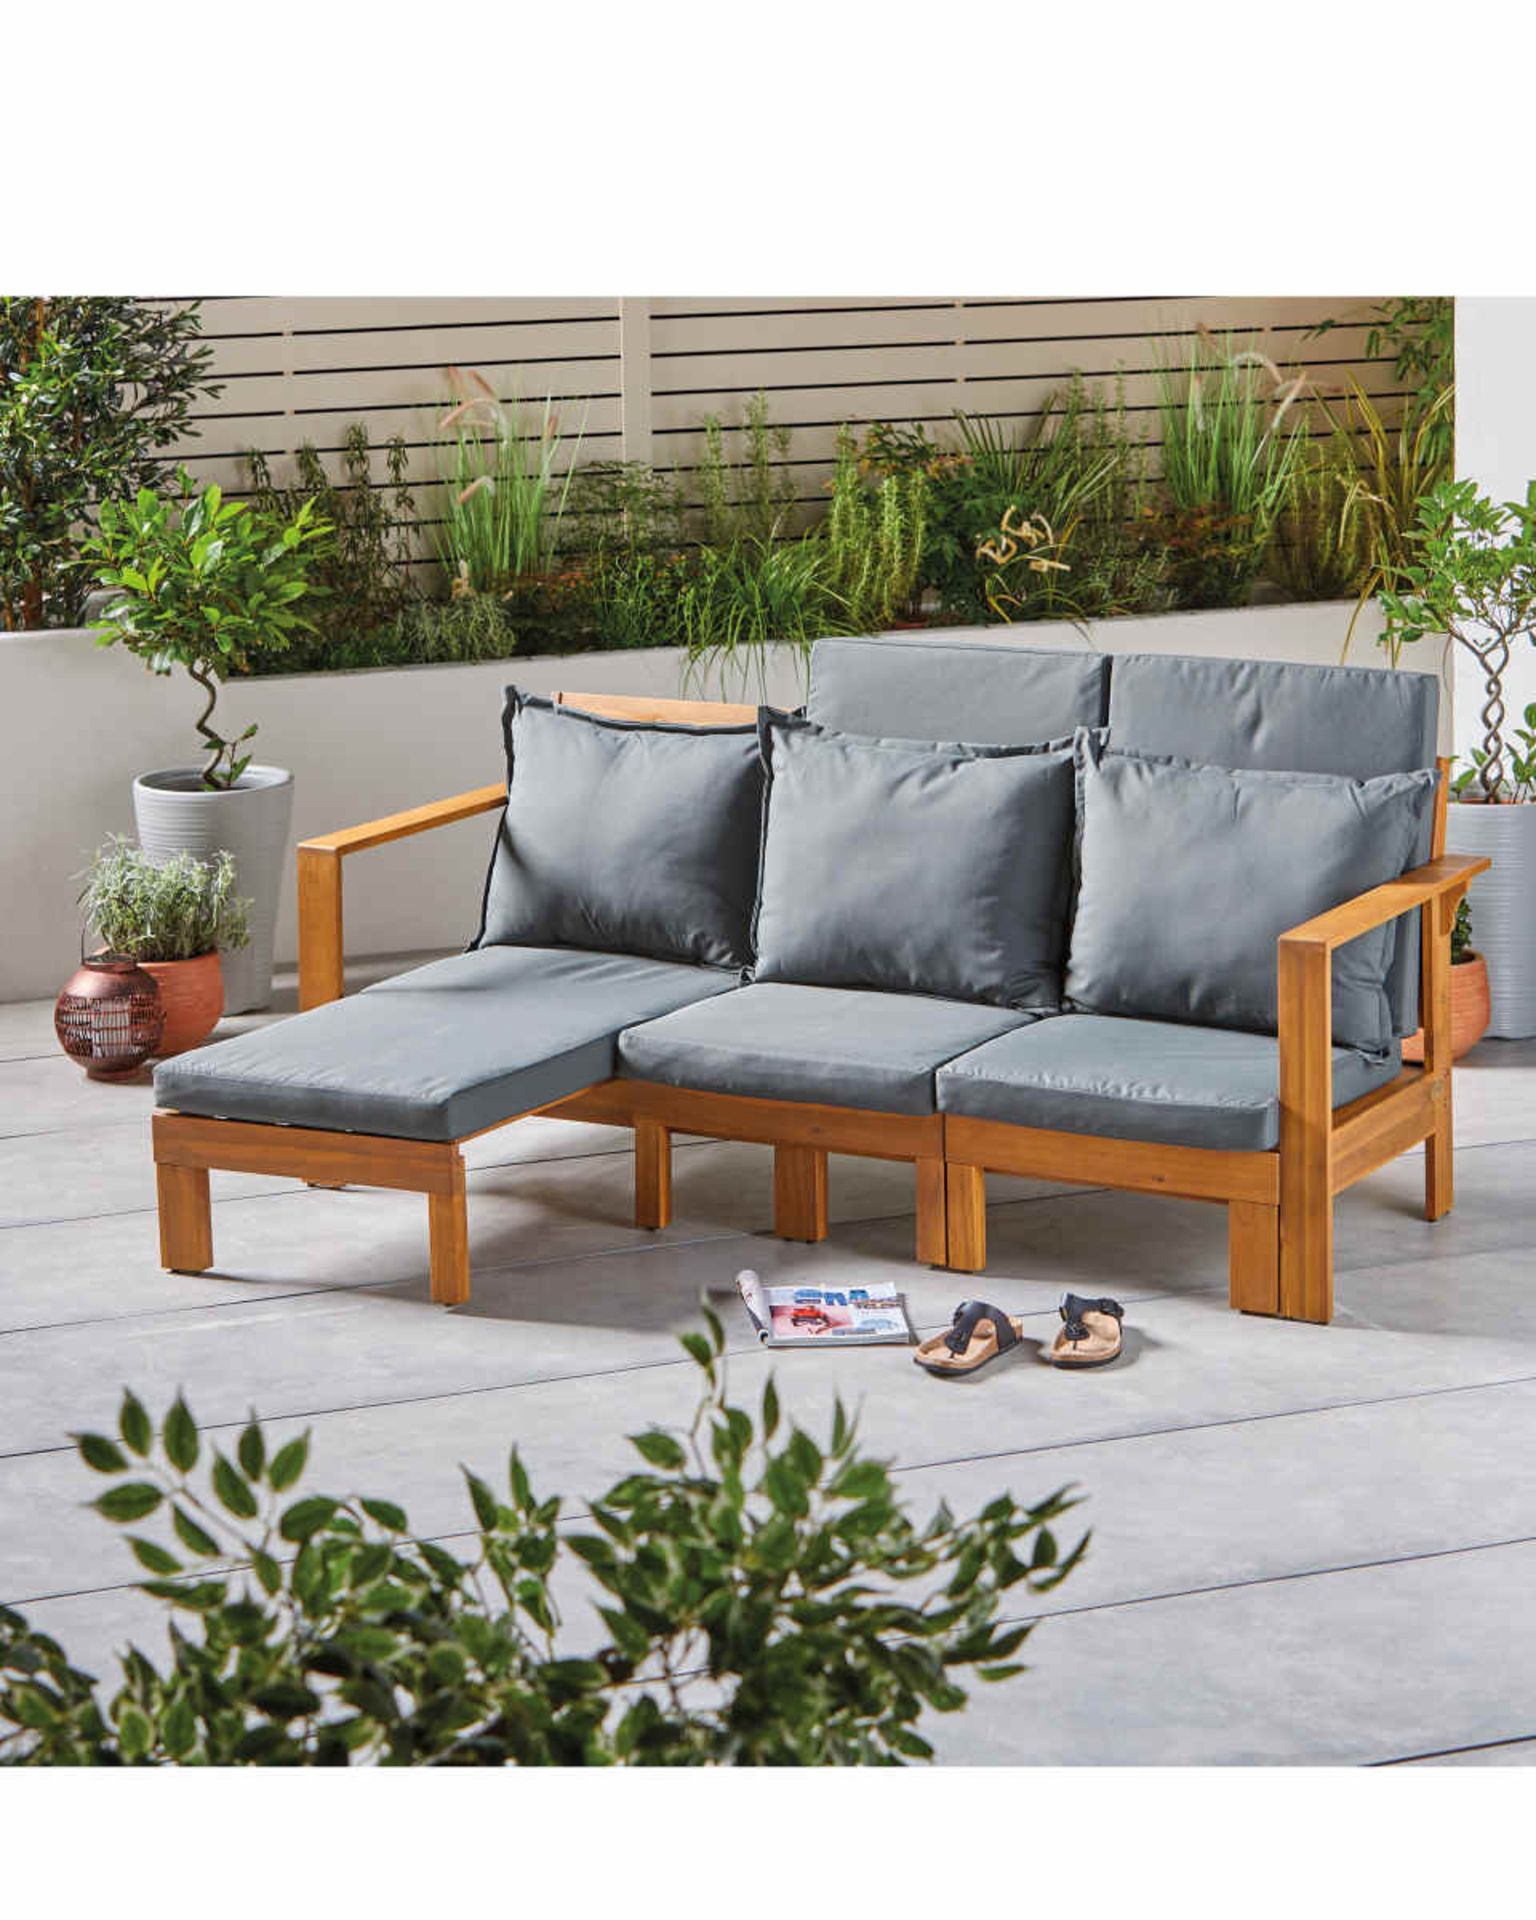 Luxury Wooden Garden Day Bed. Create a place of outdoor comfort with this stylish Luxury Wooden - Image 2 of 3